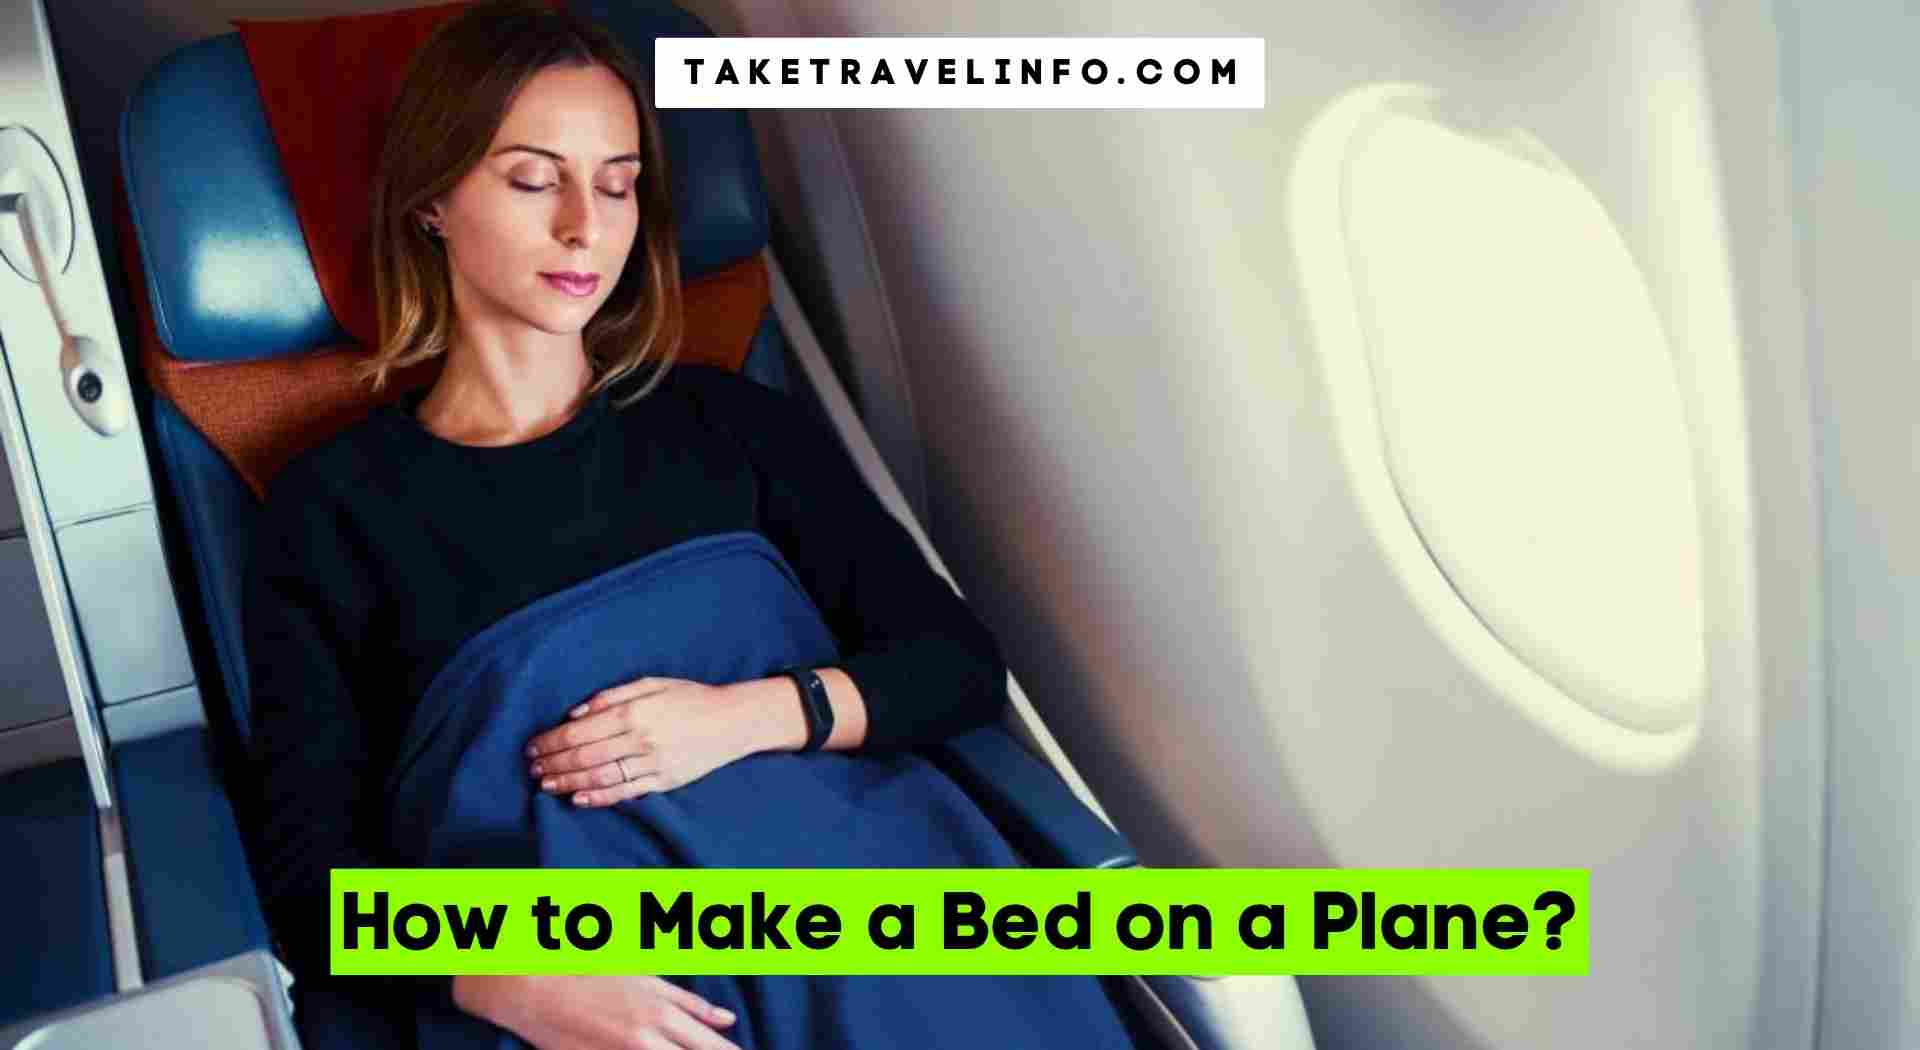 How to Make a Bed on a Plane?